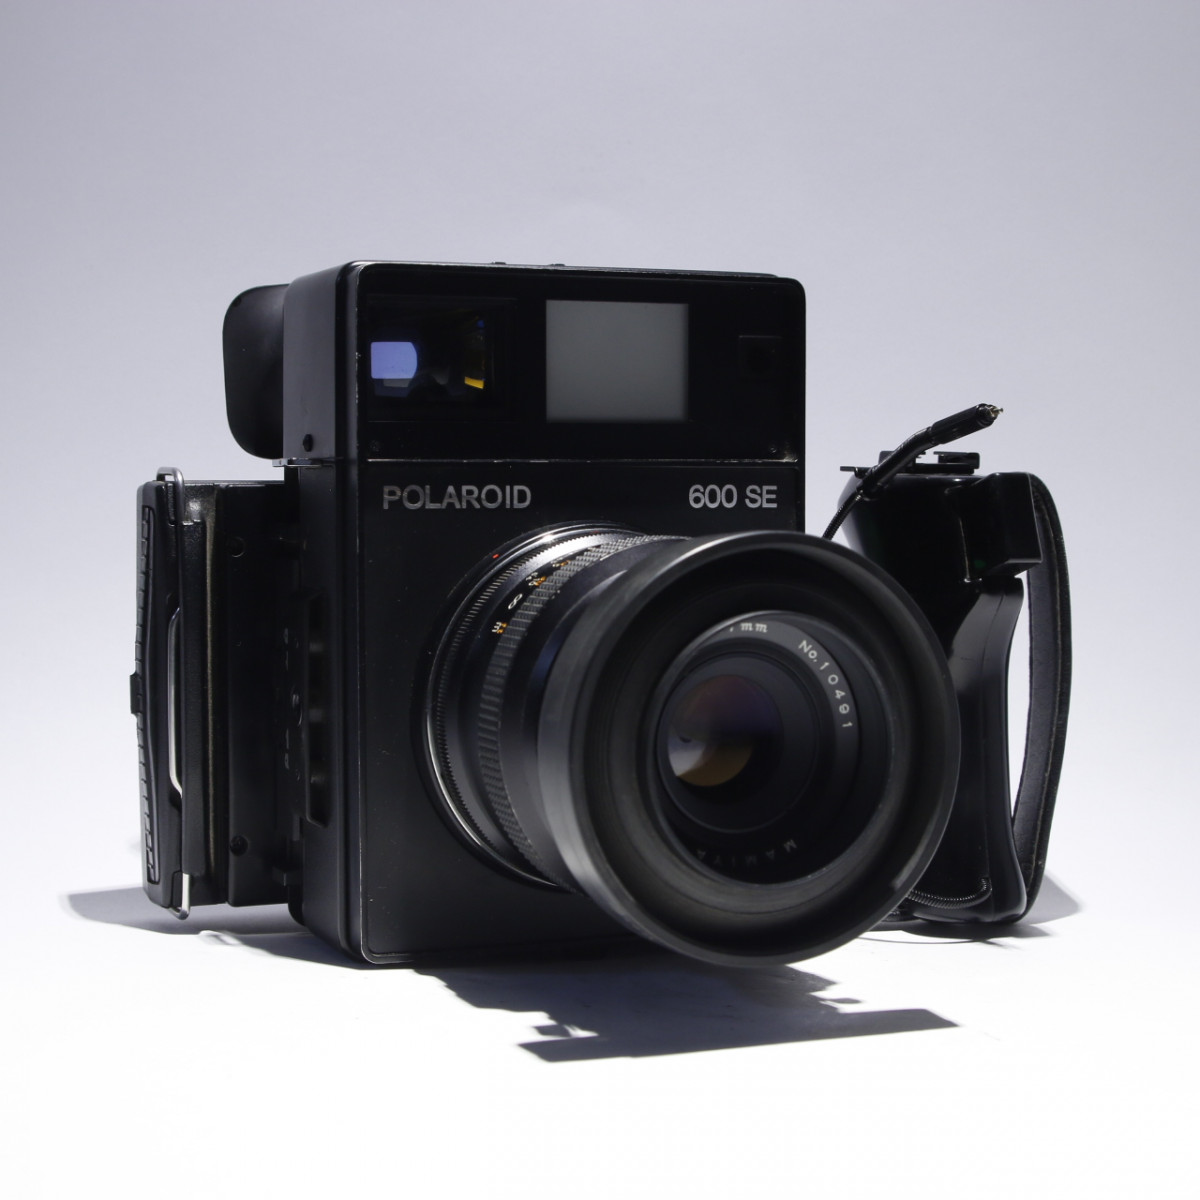 The Polaroid 600SE Was Called “The Best Instant Film Camera”